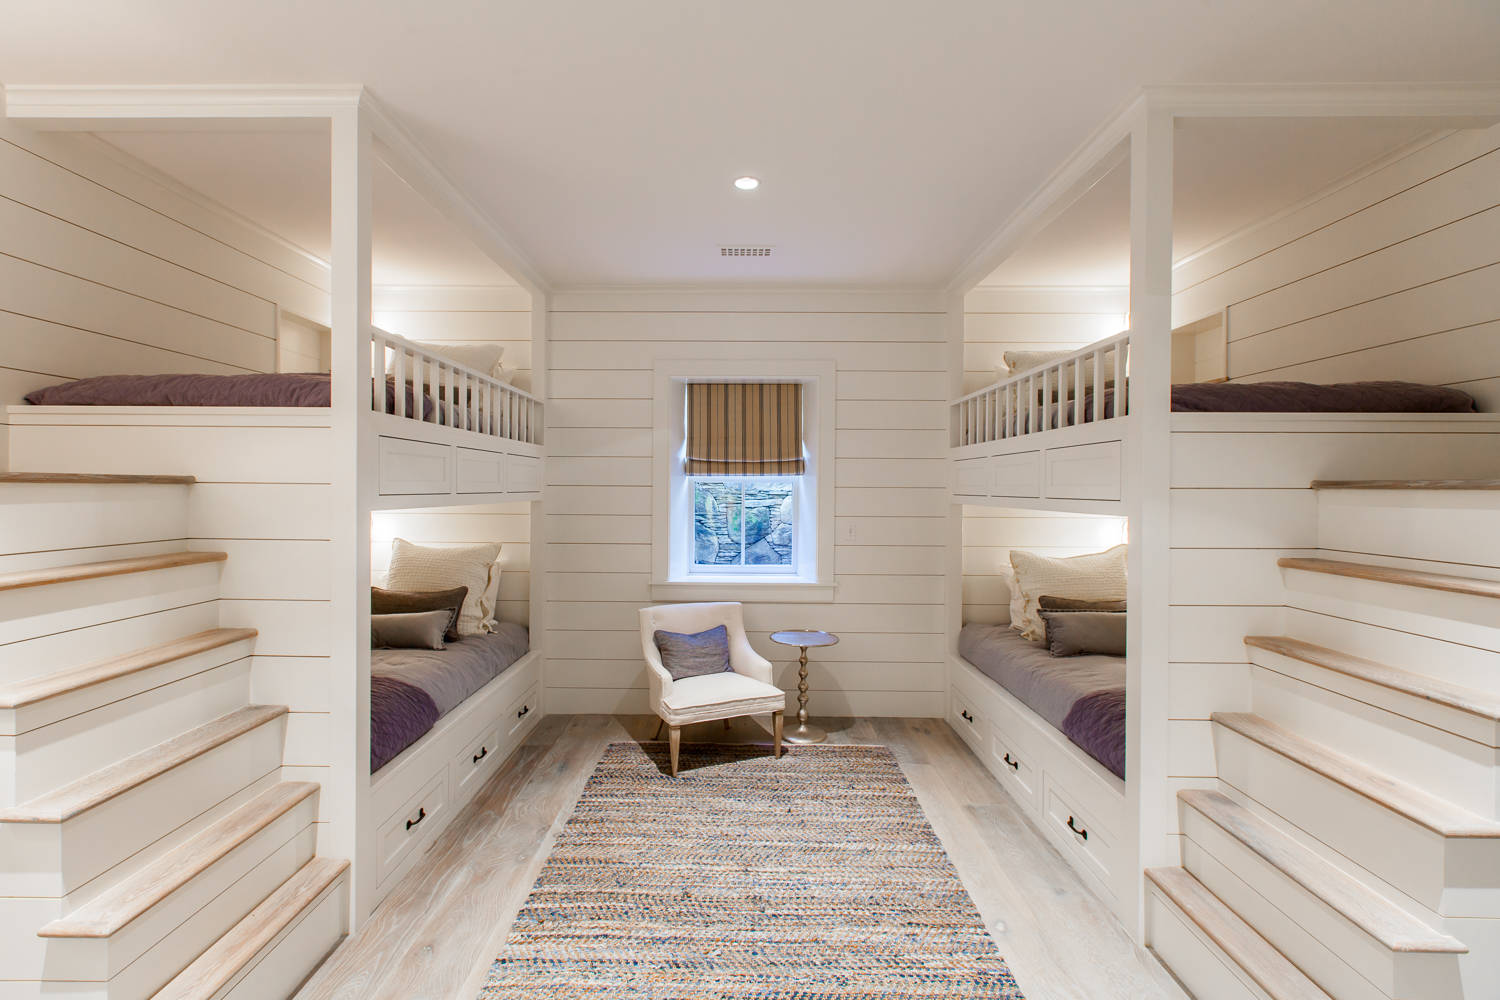 Built In Bunk Bed Stairs Houzz, Custom Bunk Beds With Stairs